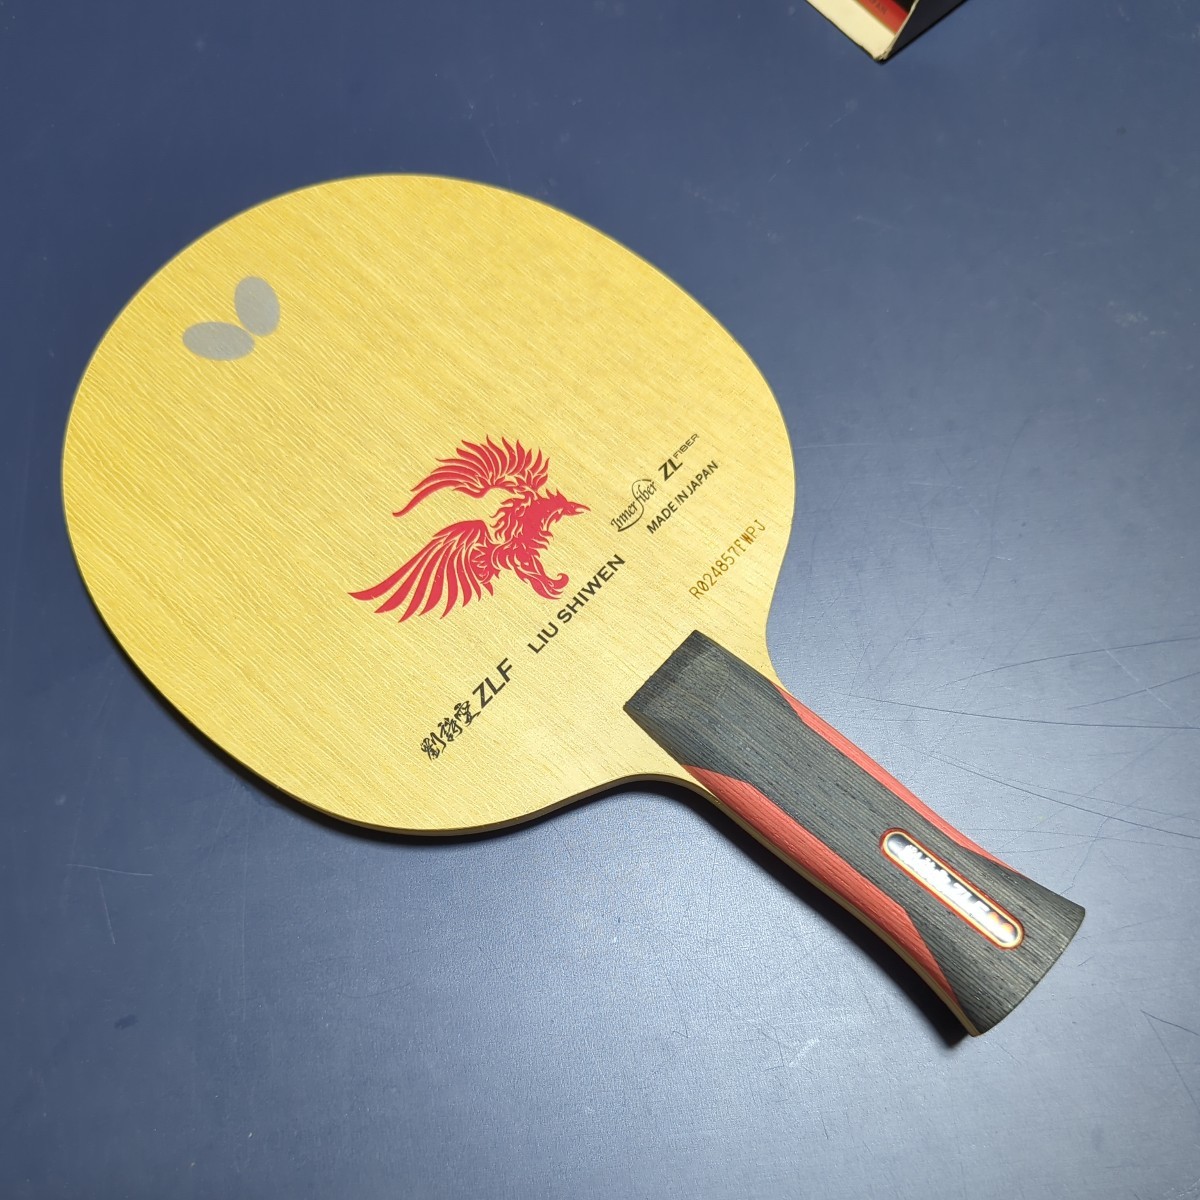  ping-pong racket . poetry zlf inner force records out of production almost new goods butterfly